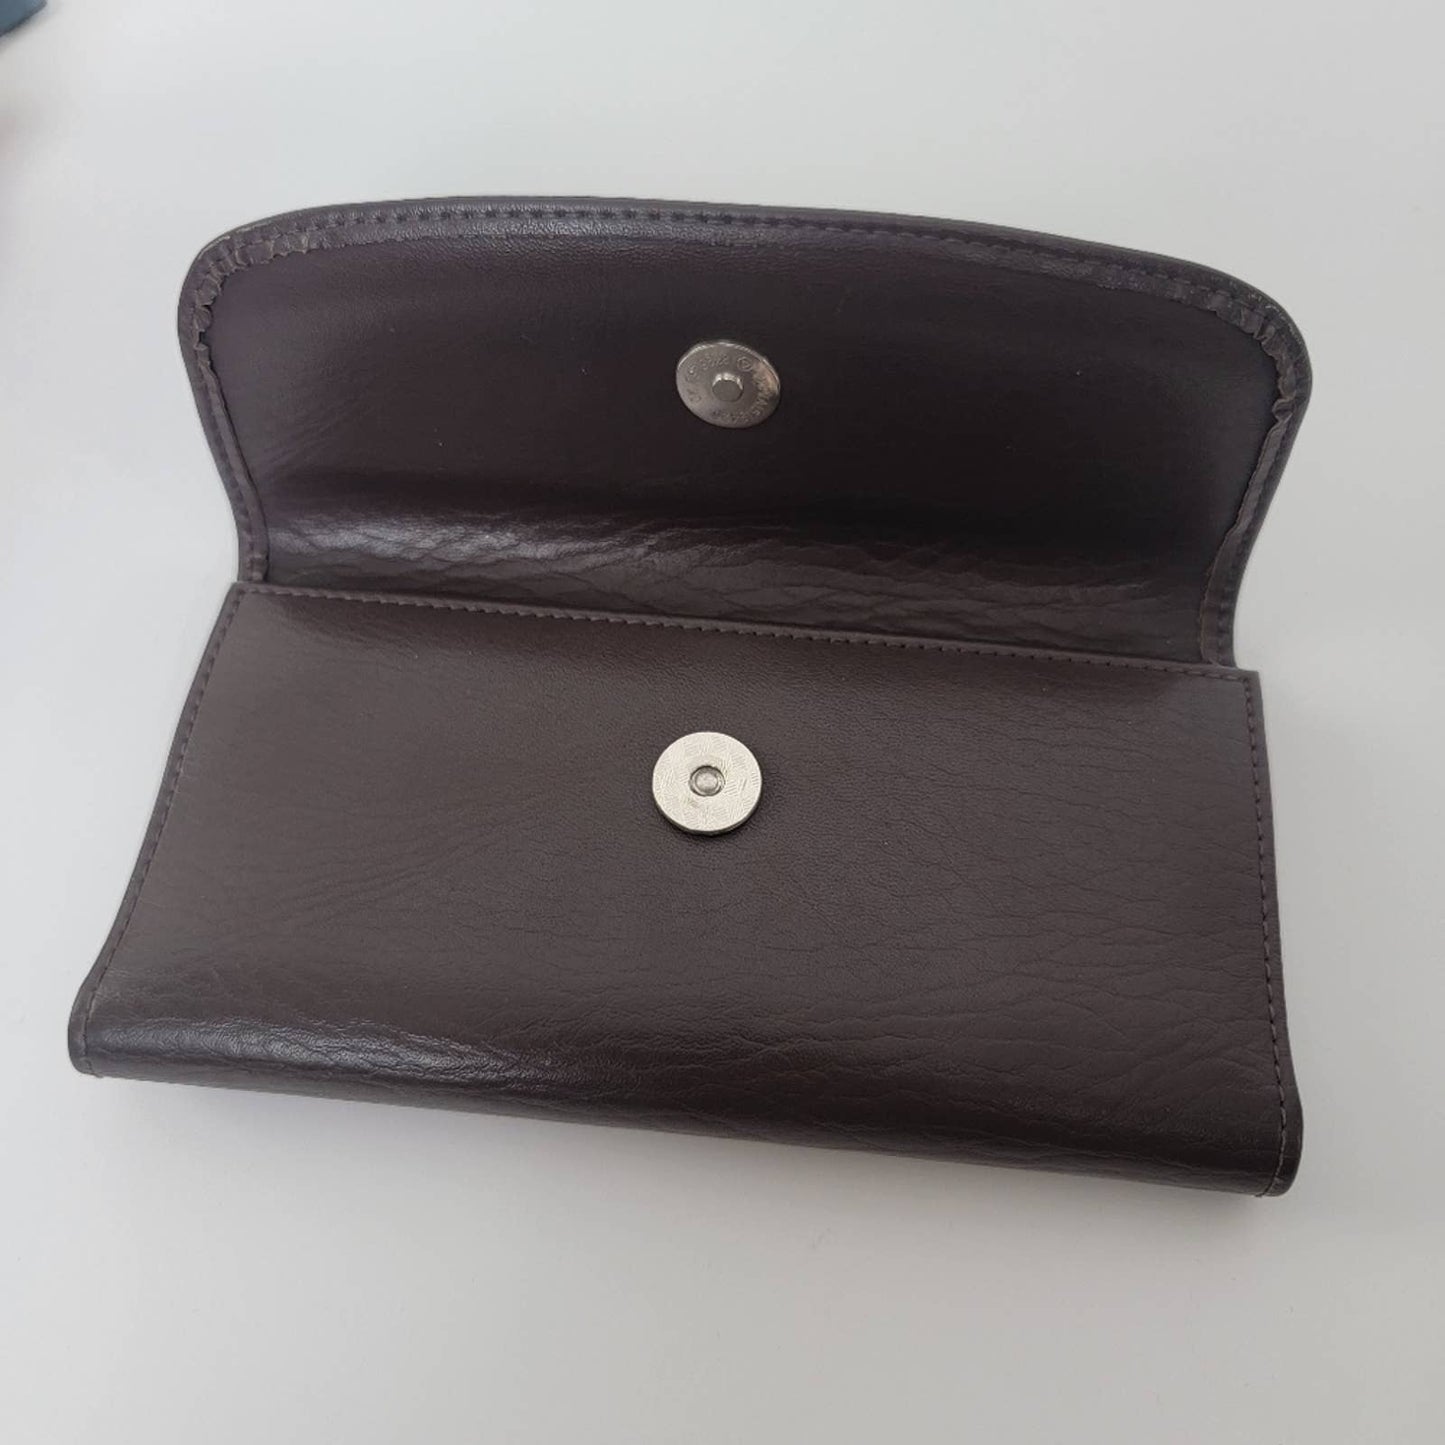 Coach Trifold Chocolate Brown Leather Wallet